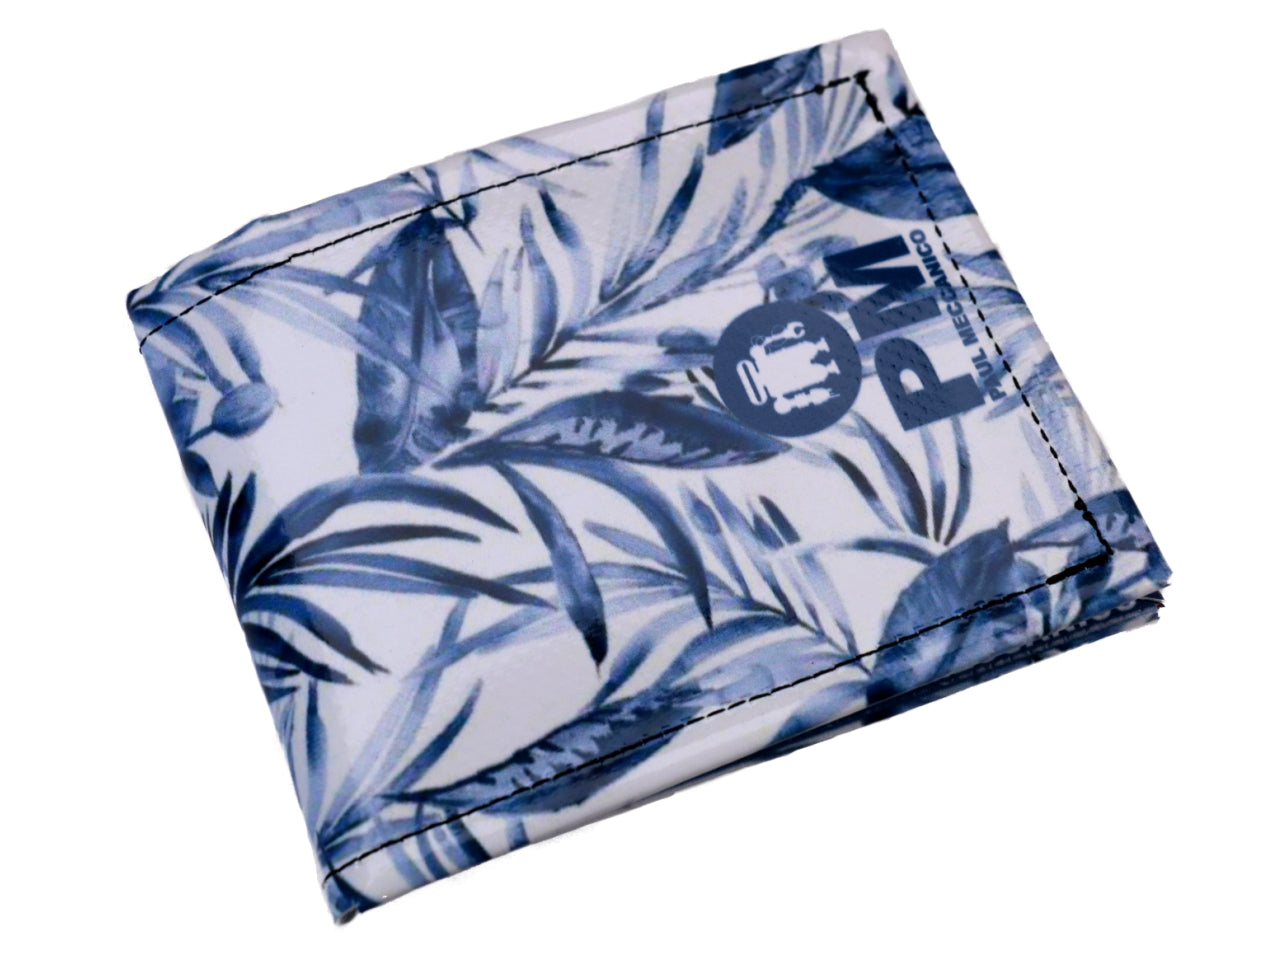 MEN'S WALLET BLUE AND WHITE WITH FLORAL FANTASY. MODEL CRIK MADE OF LORRY TARPAULIN. - Limited Edition Paul Meccanico